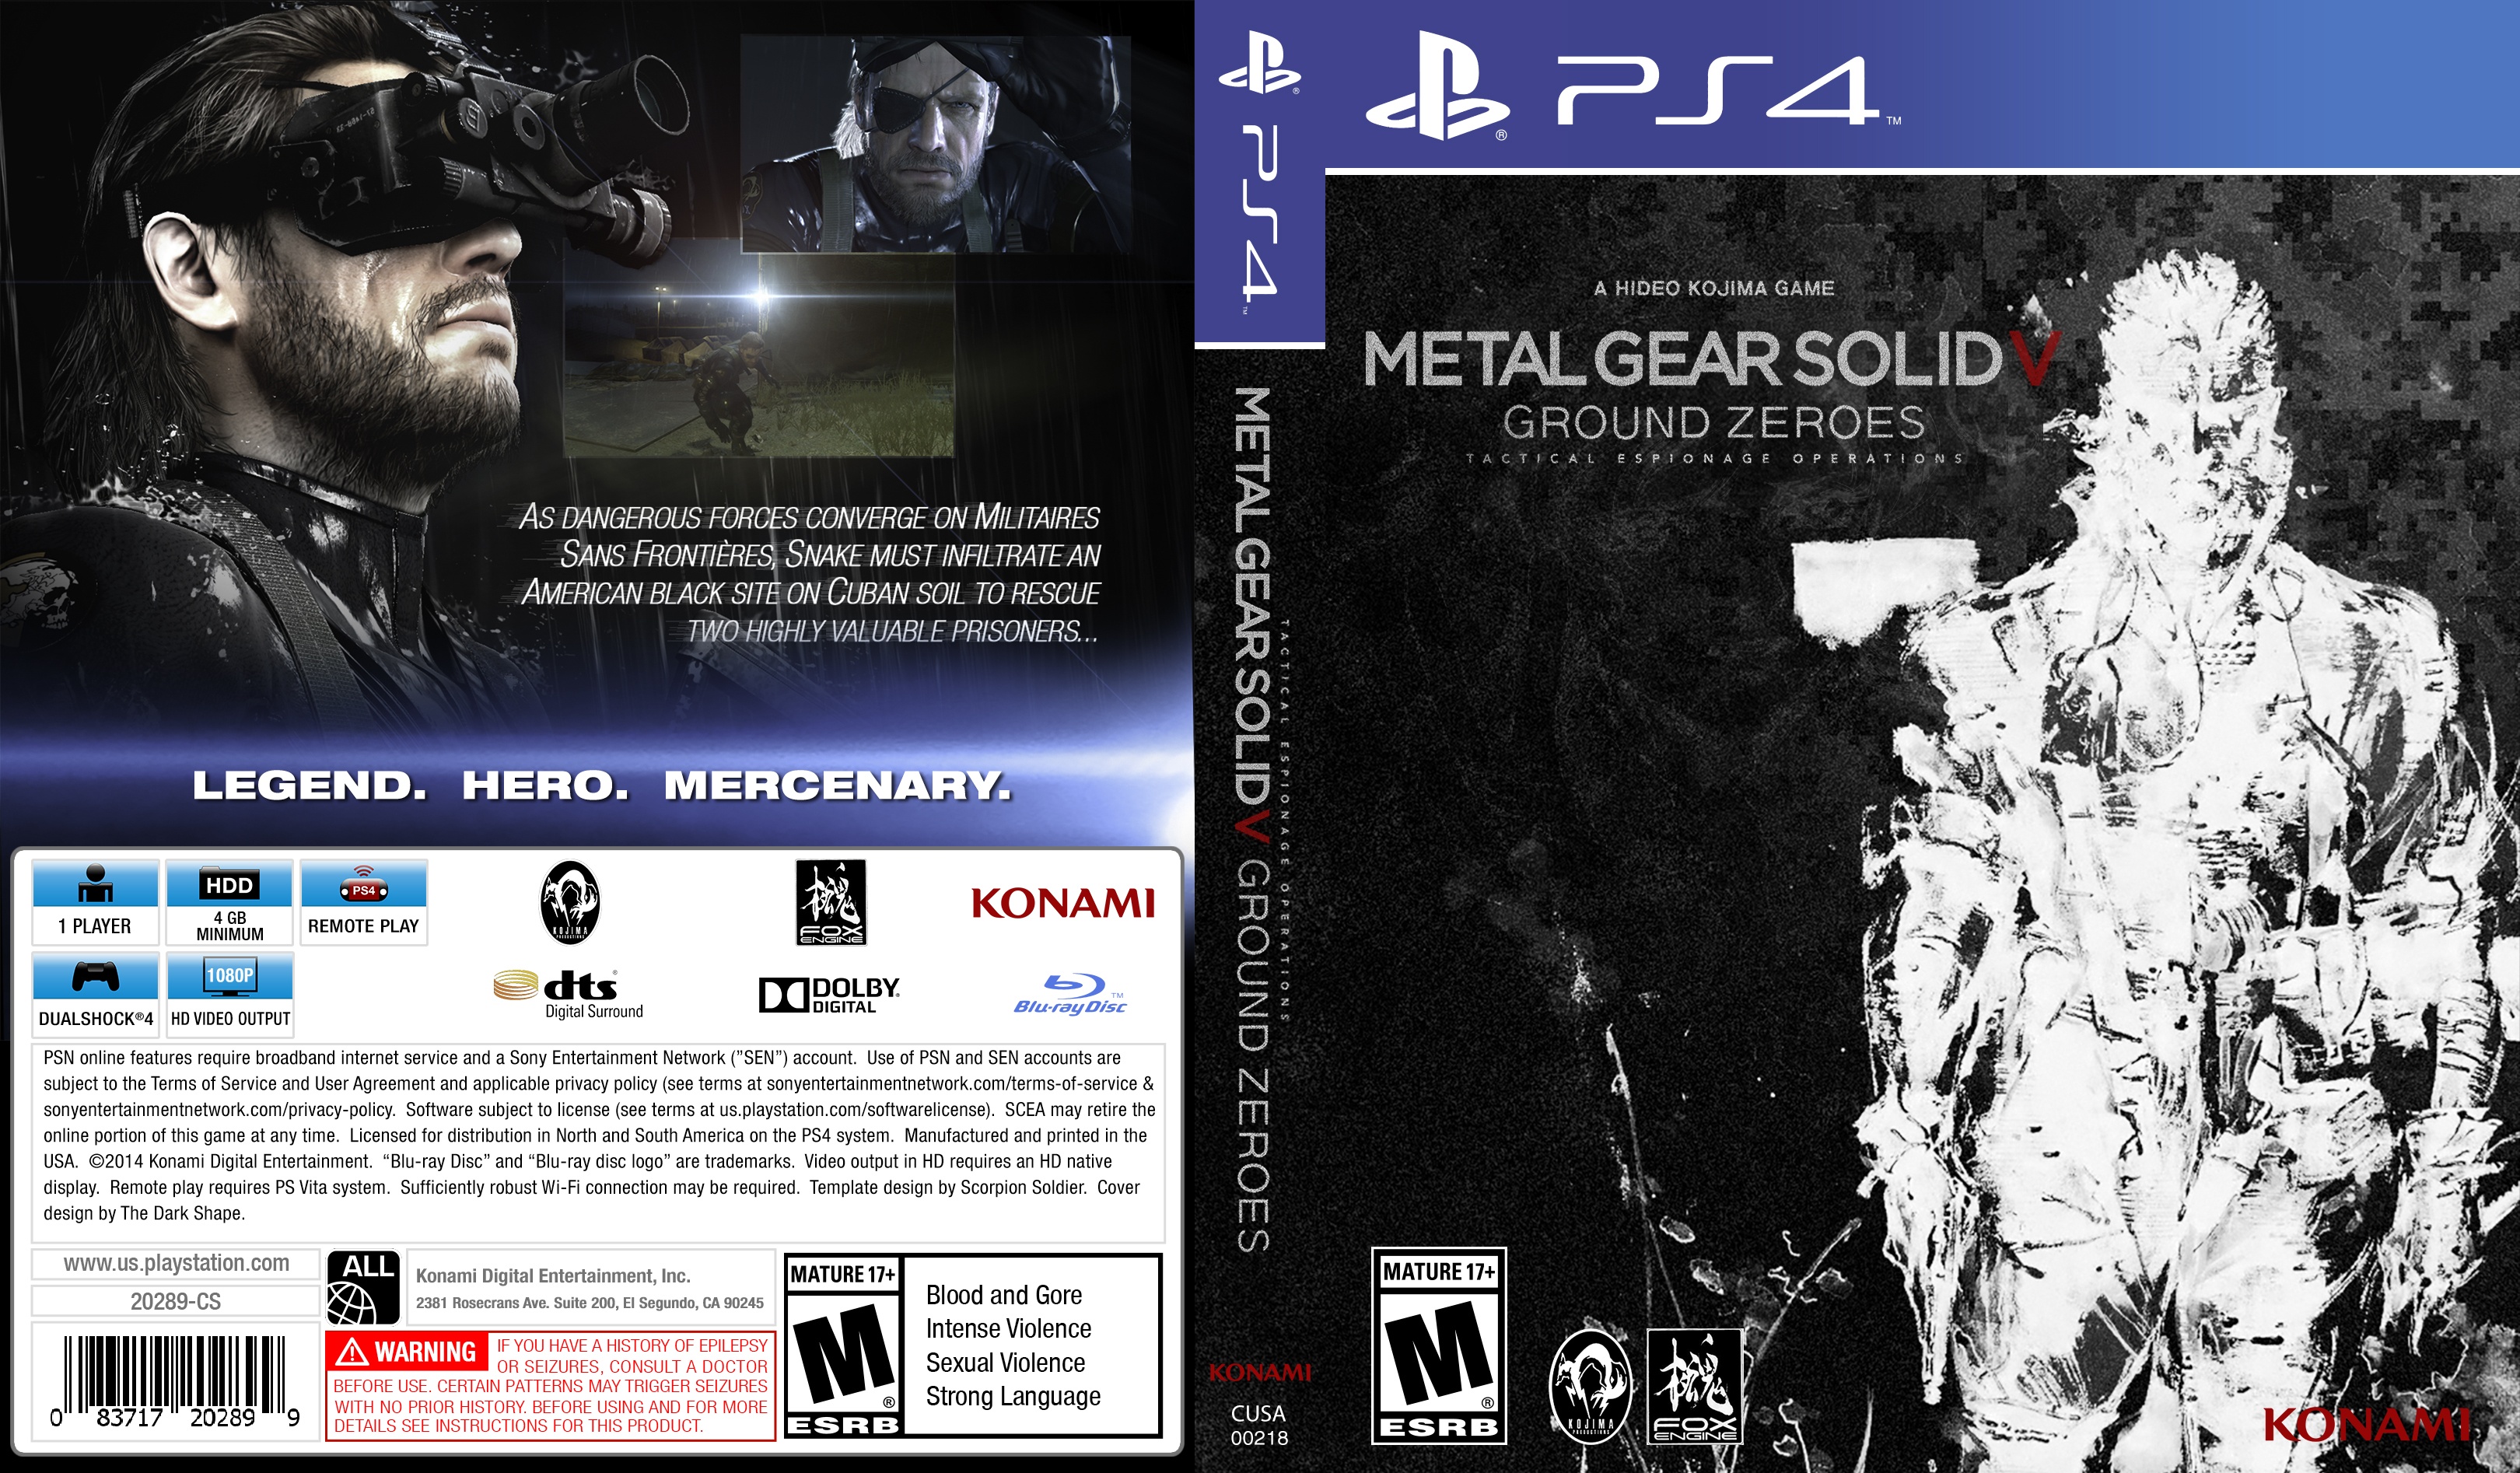 Metal Gear Solid V: Ground Zeroes box cover